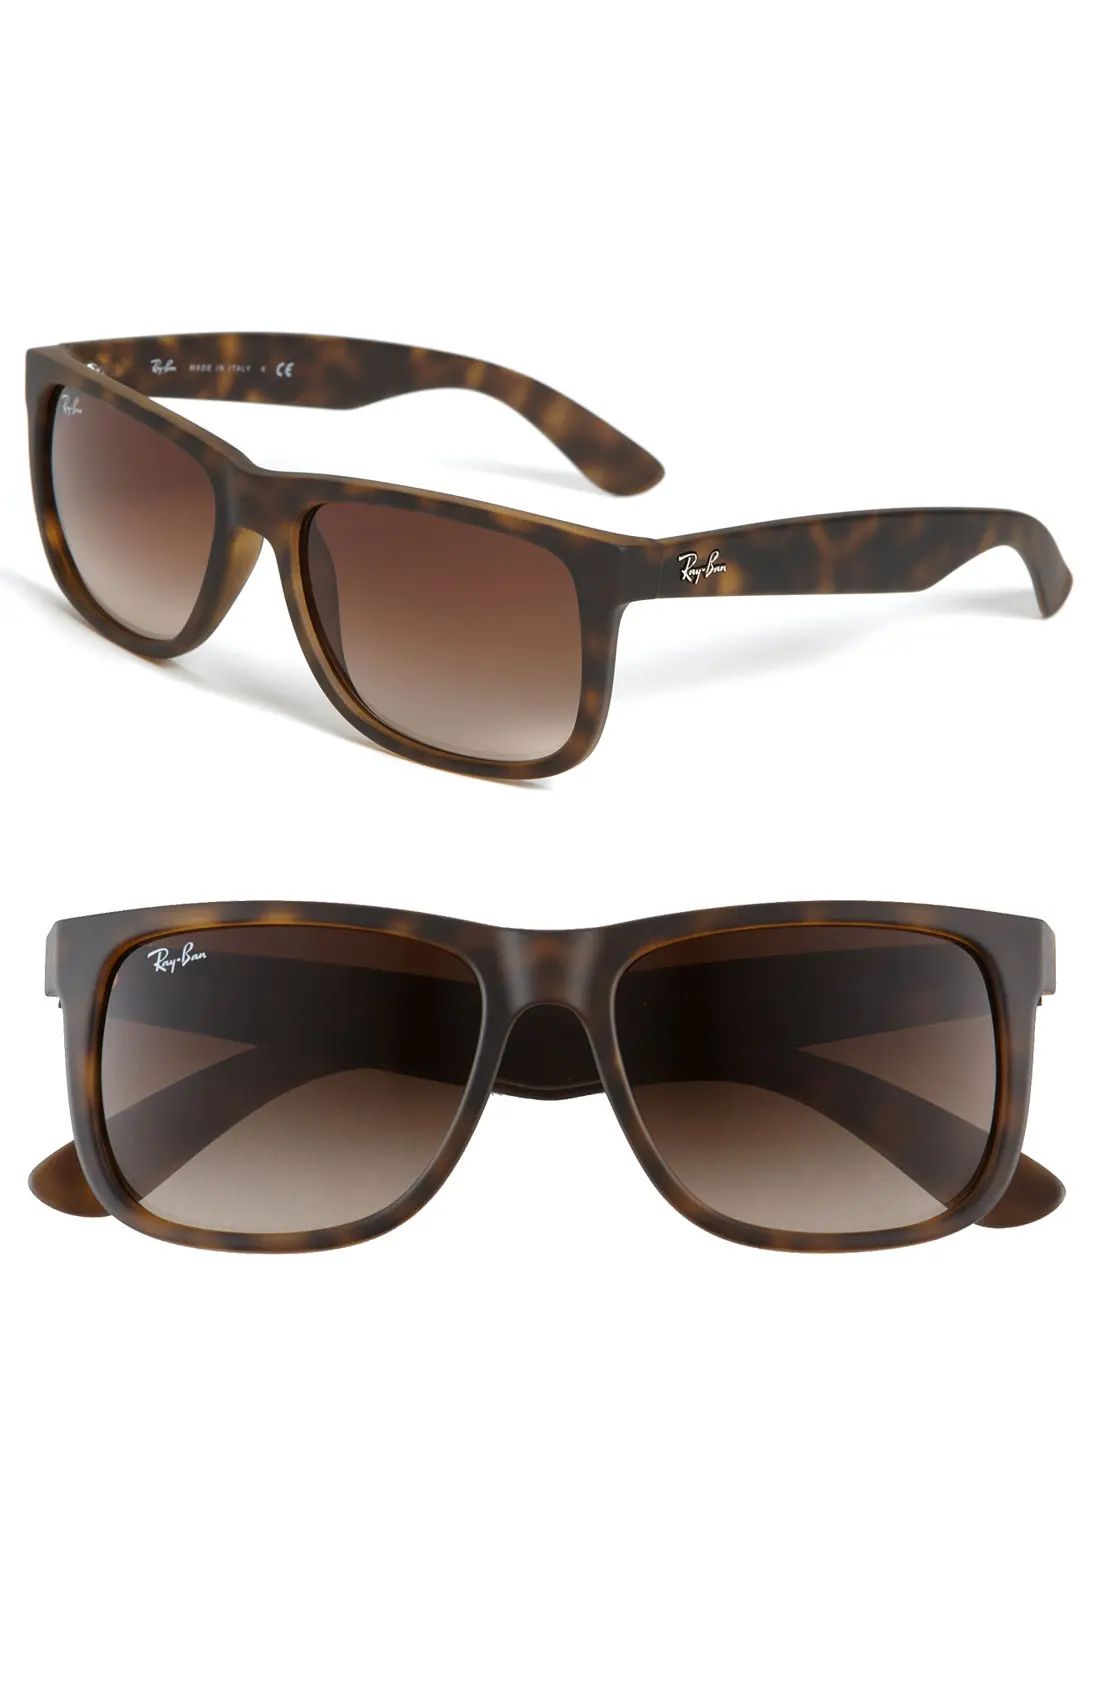 Youngster 54mm Sunglasses | Nordstrom